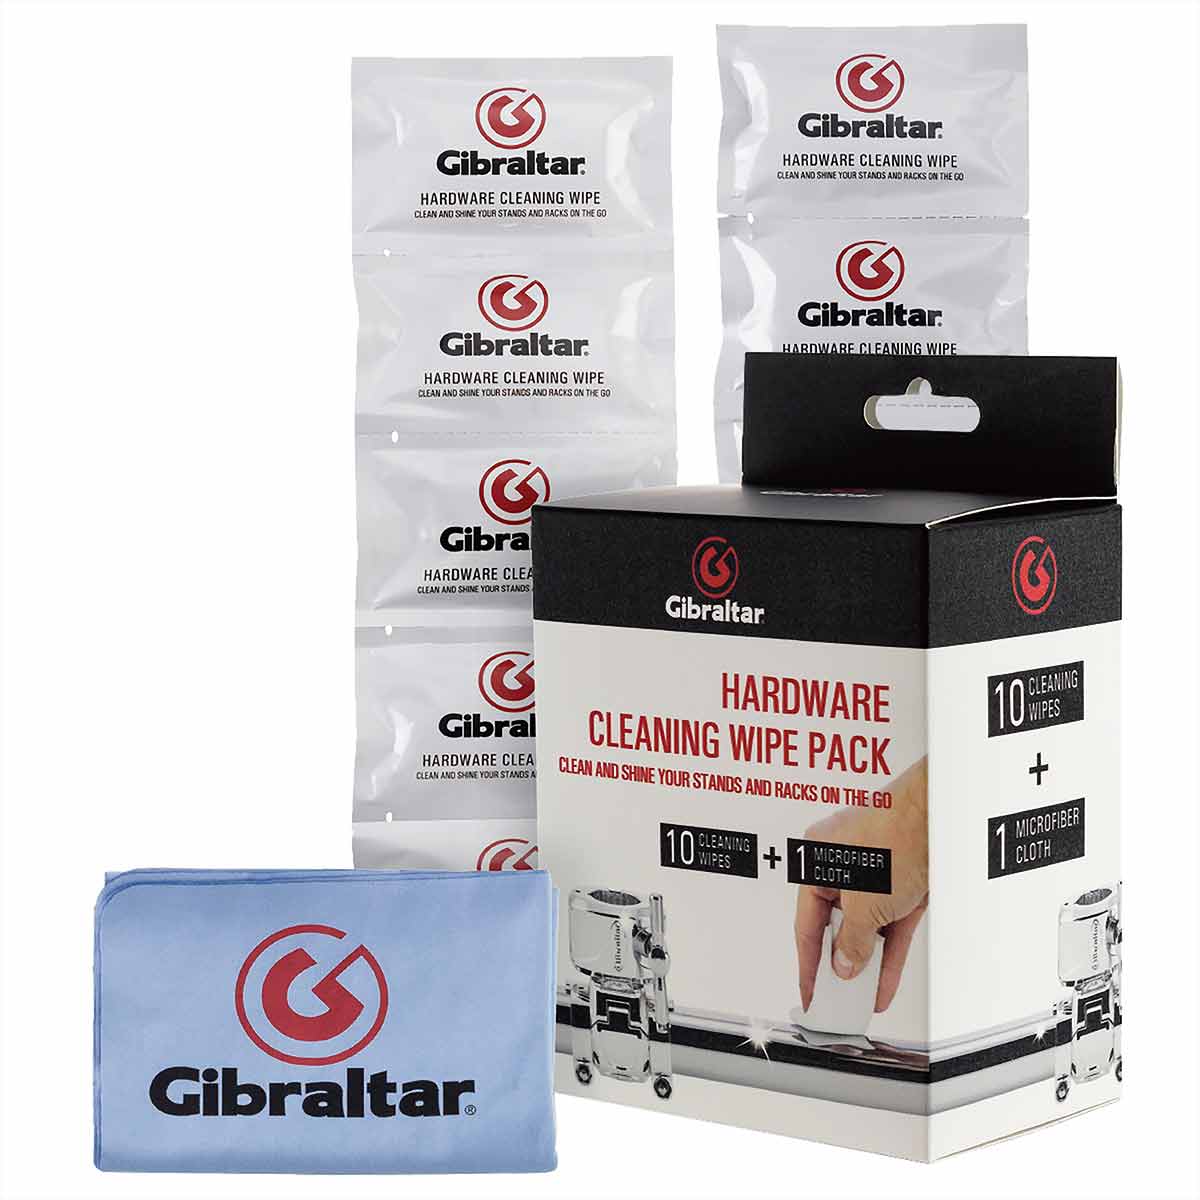  Gibraltar SC-HCW10 Hardware Cleaning Wipes, 10 Pack drummer accessory